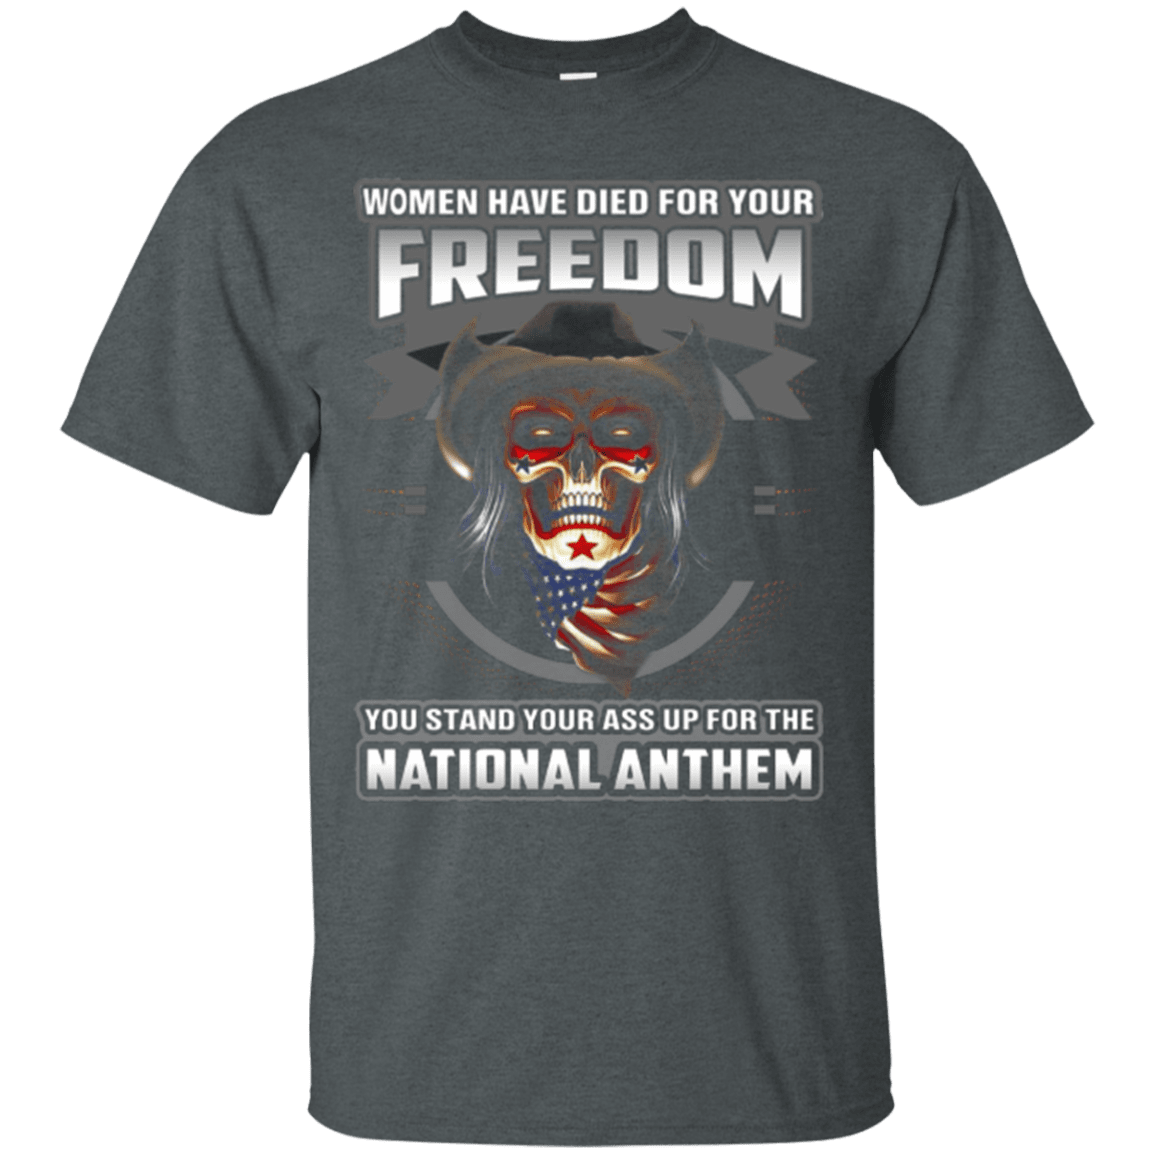 Military T-Shirt "Women Have Died For Your Freedom Stand Up For The National Anthem"-TShirt-General-Veterans Nation